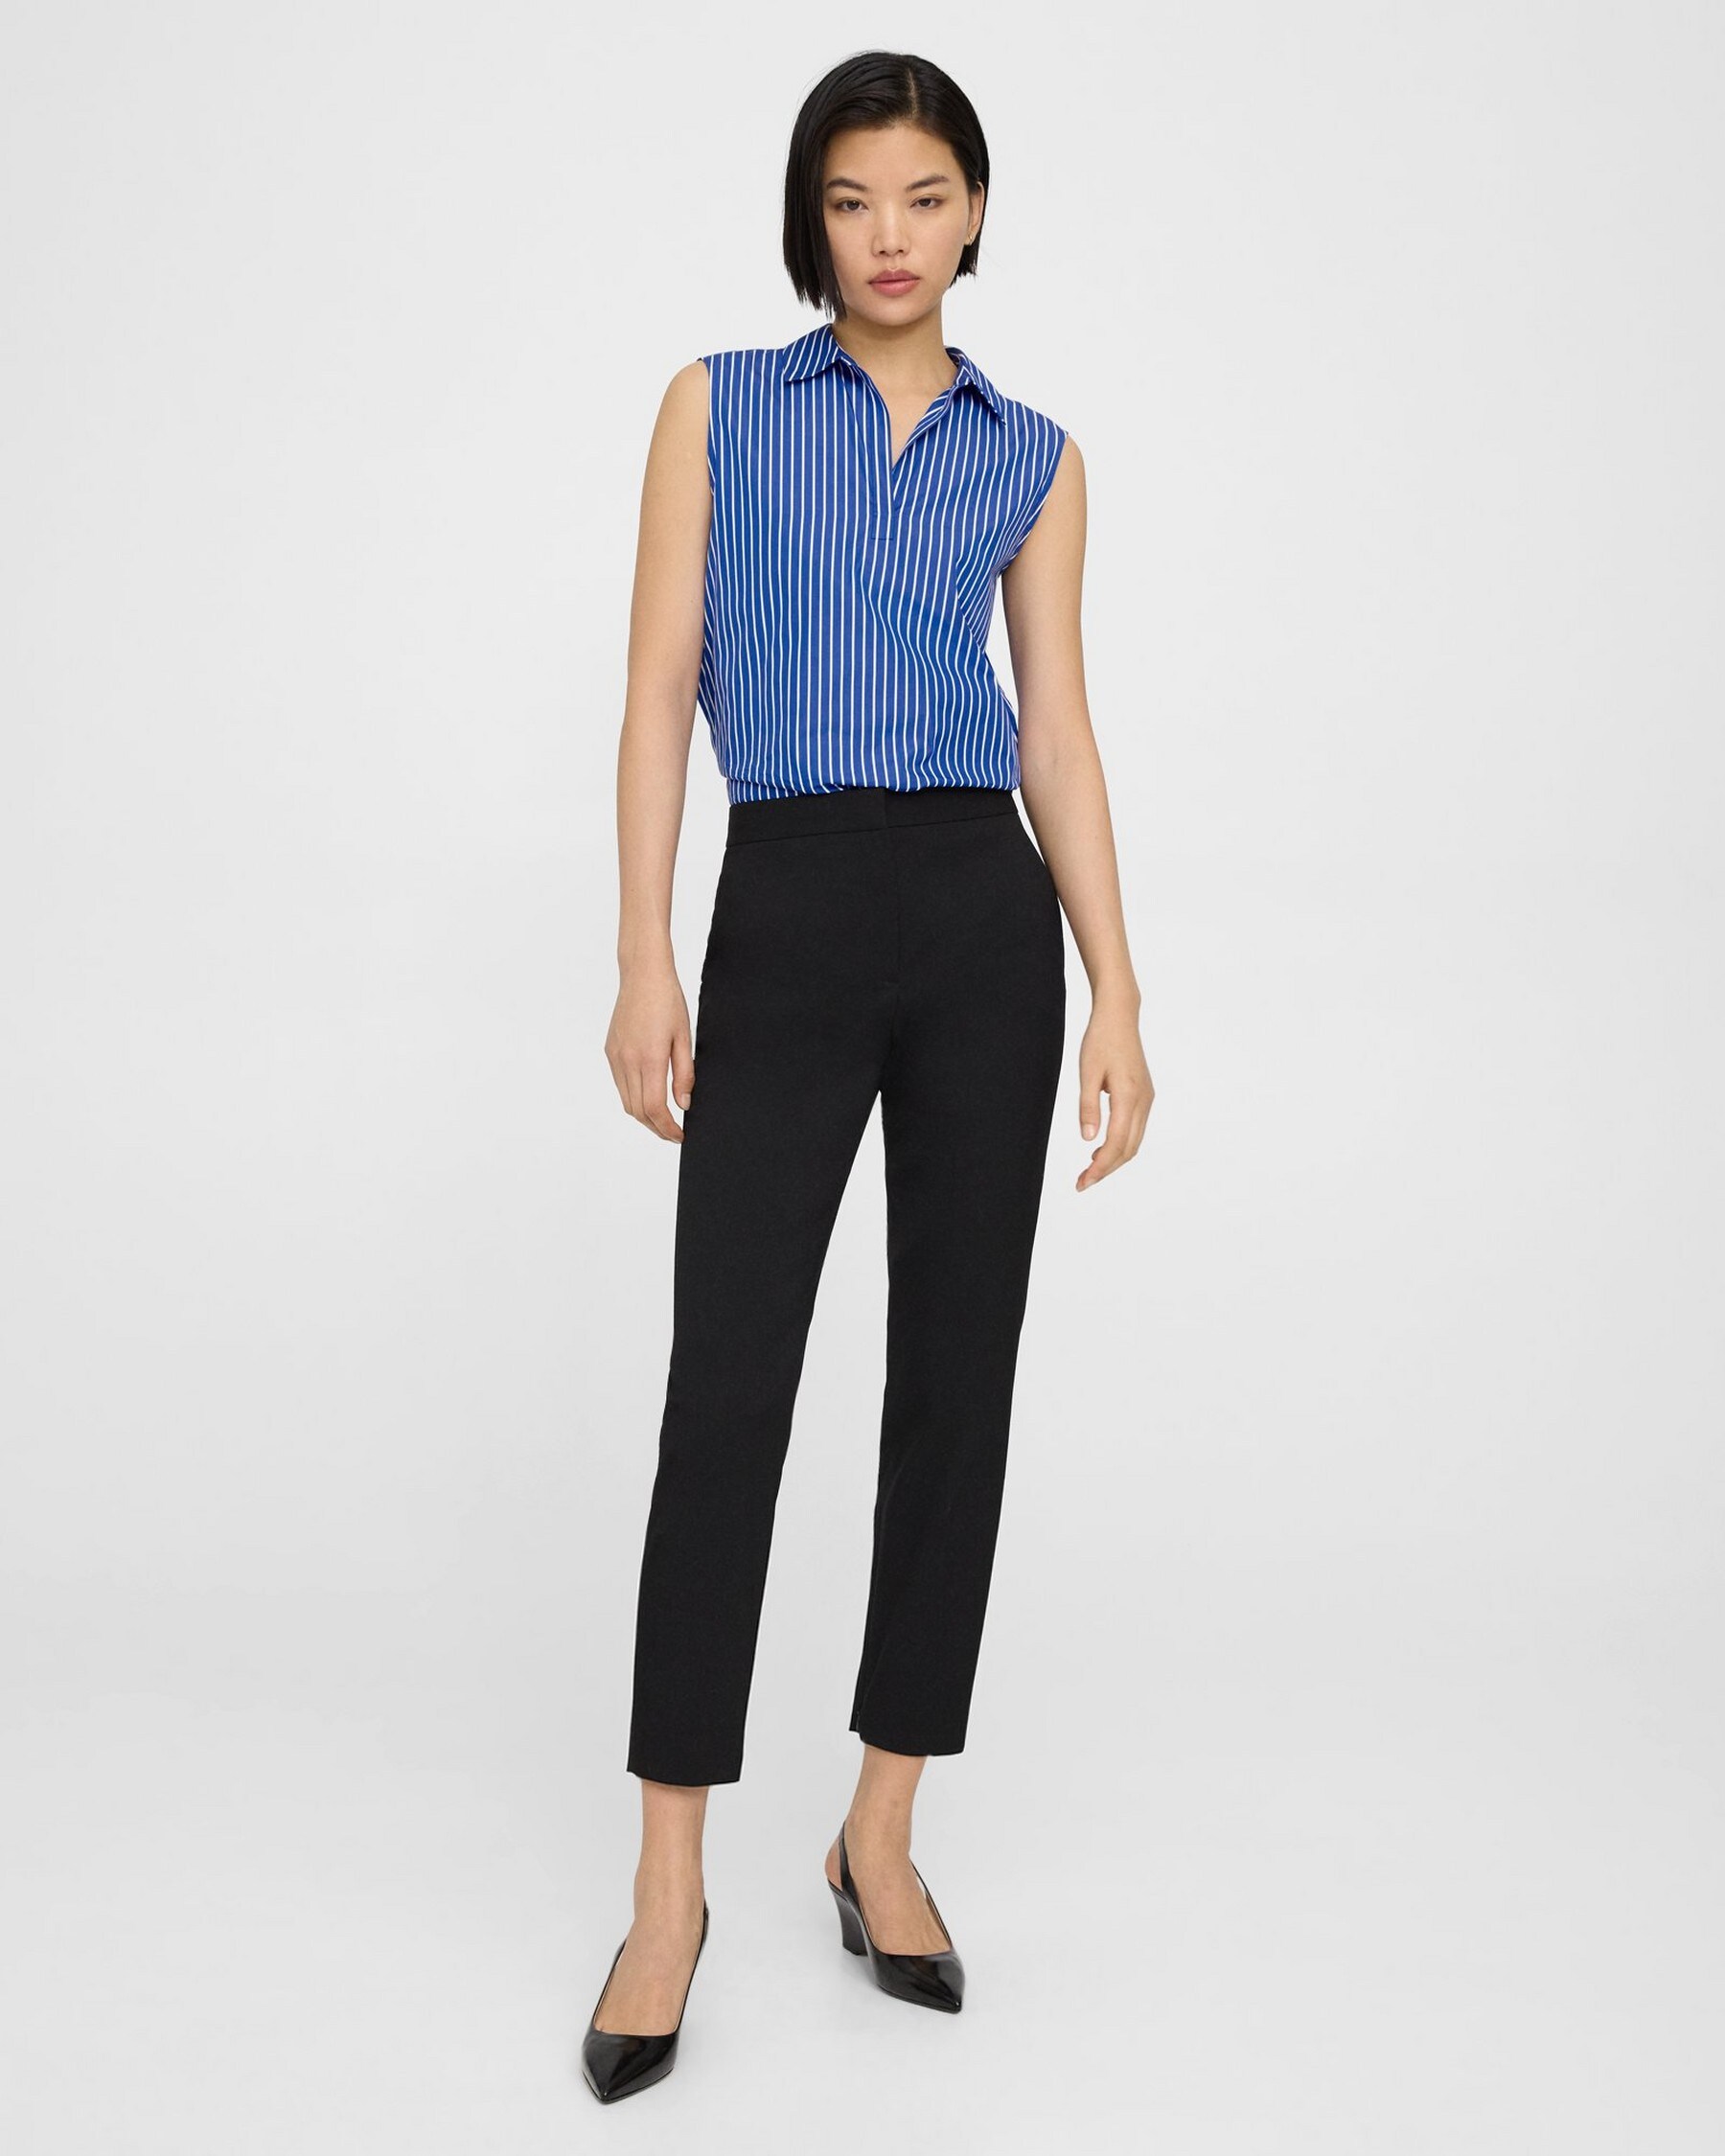 Fitted Pant in Textured Gabardine